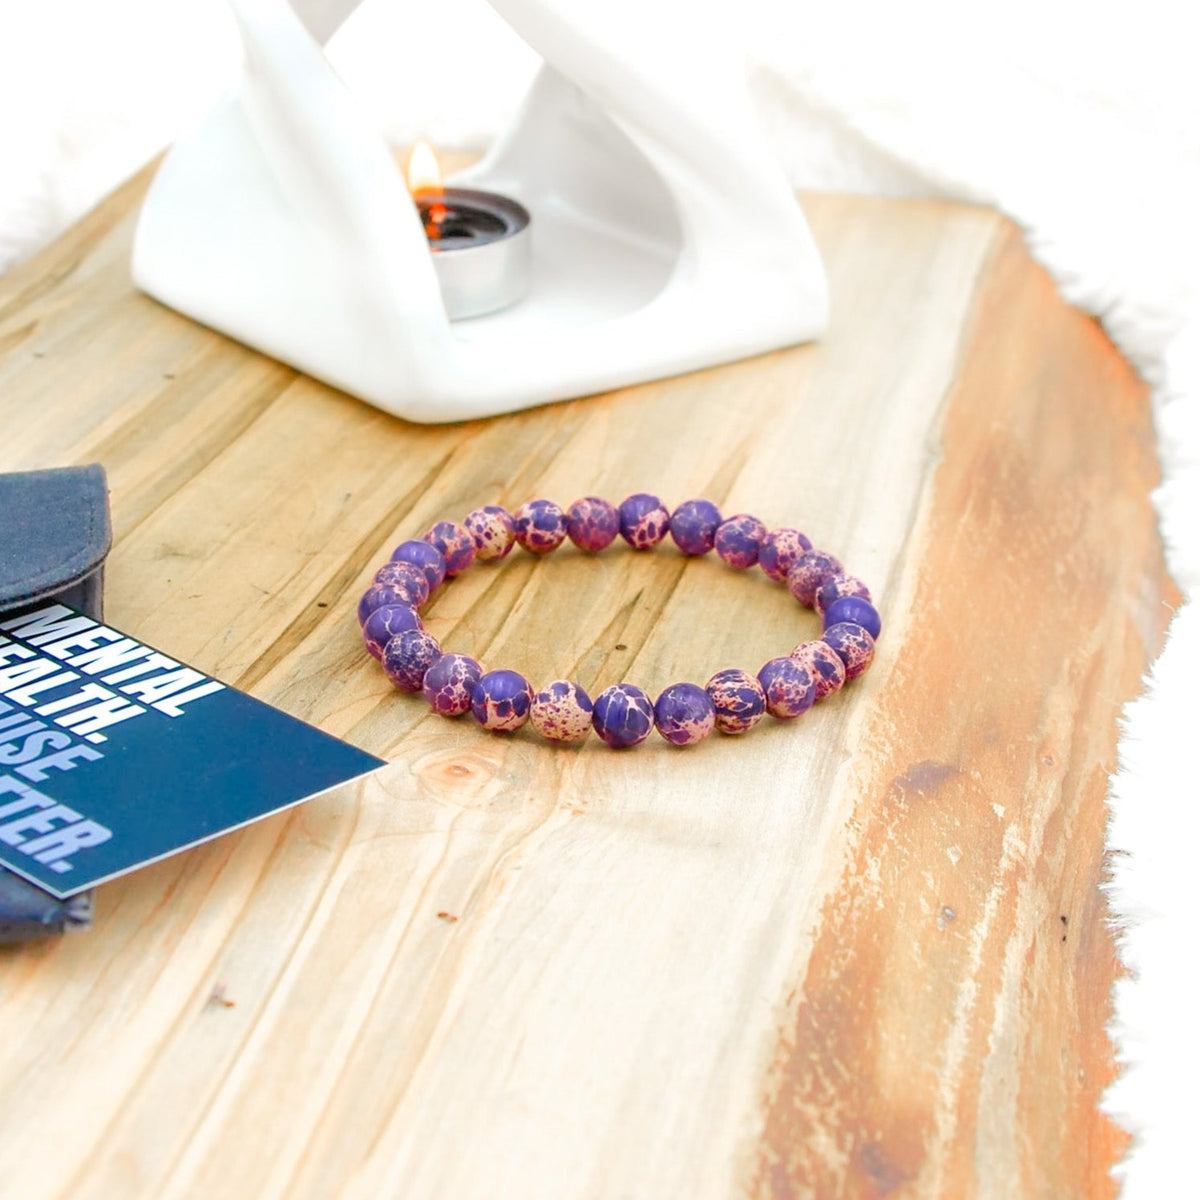 emperor stone, purple emperor stone, emperor stone bracelet, gemstone bracelet, mala bracelet, stones for anxiety, anxiety stones